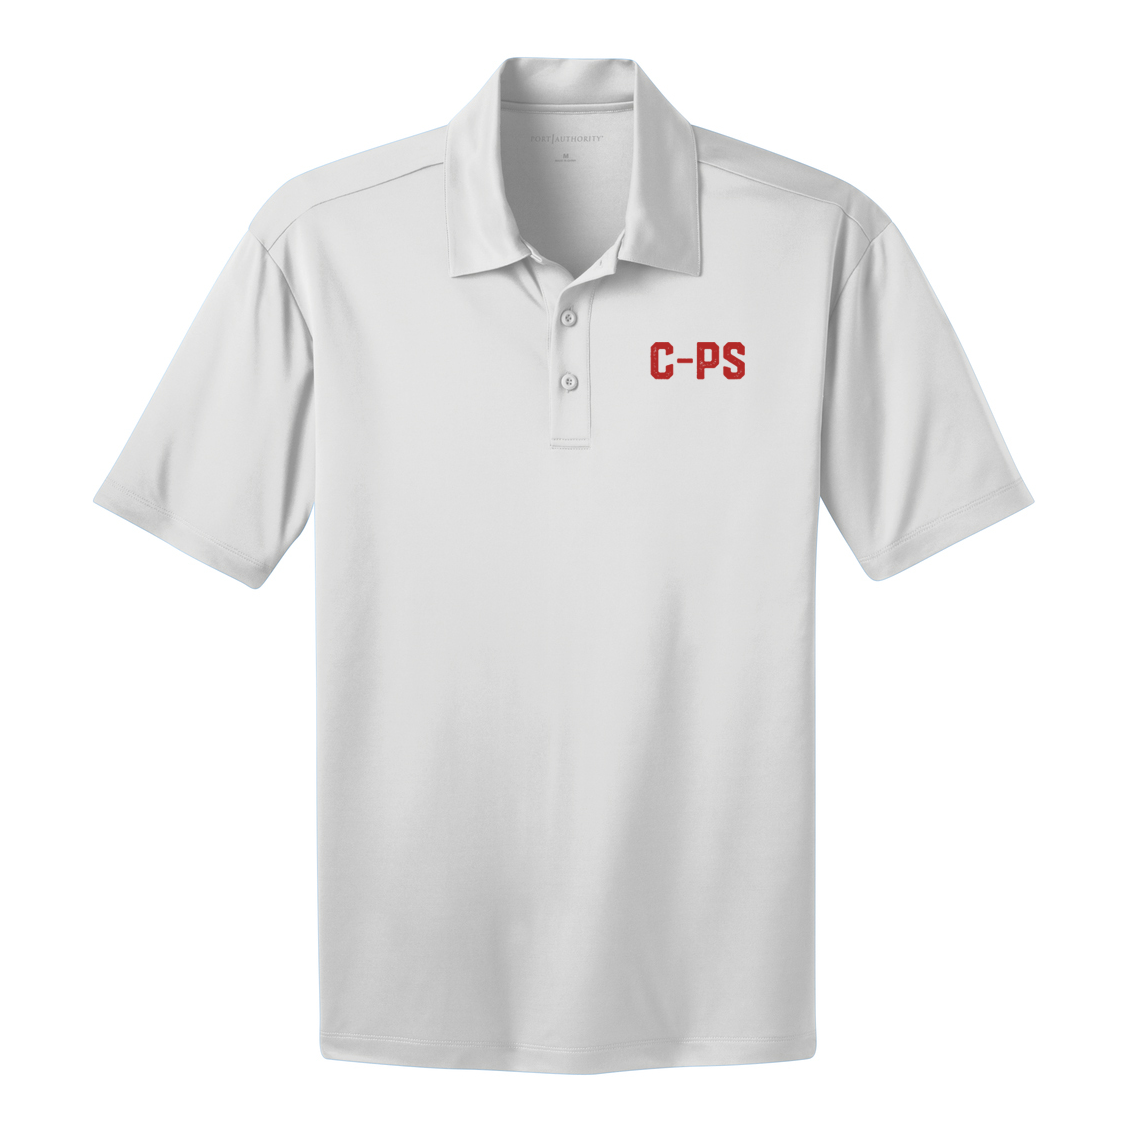 Champion Physical Therapy Polo